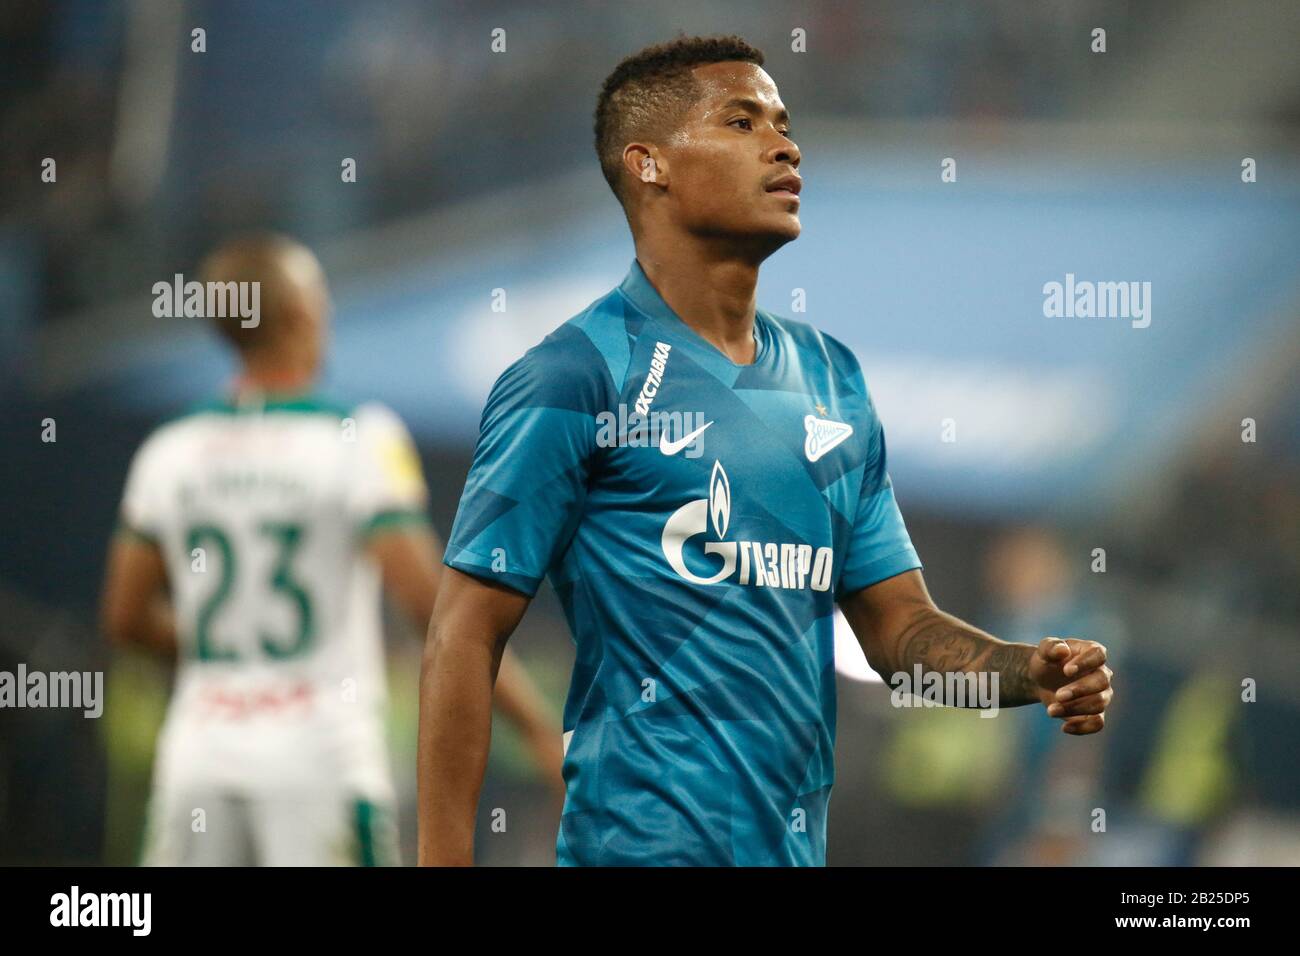 Saint Petersburg, Russia. 29th Feb, 2020. Wilmar Barrios of Zenit reacts during the Russian football Premier League match between Zenit St. Petersburg and Locomotiv Moscow. (Final score; Zenit St. Petersburg 0:0 Lokomotiv Moscow) Credit: SOPA Images Limited/Alamy Live News Stock Photo